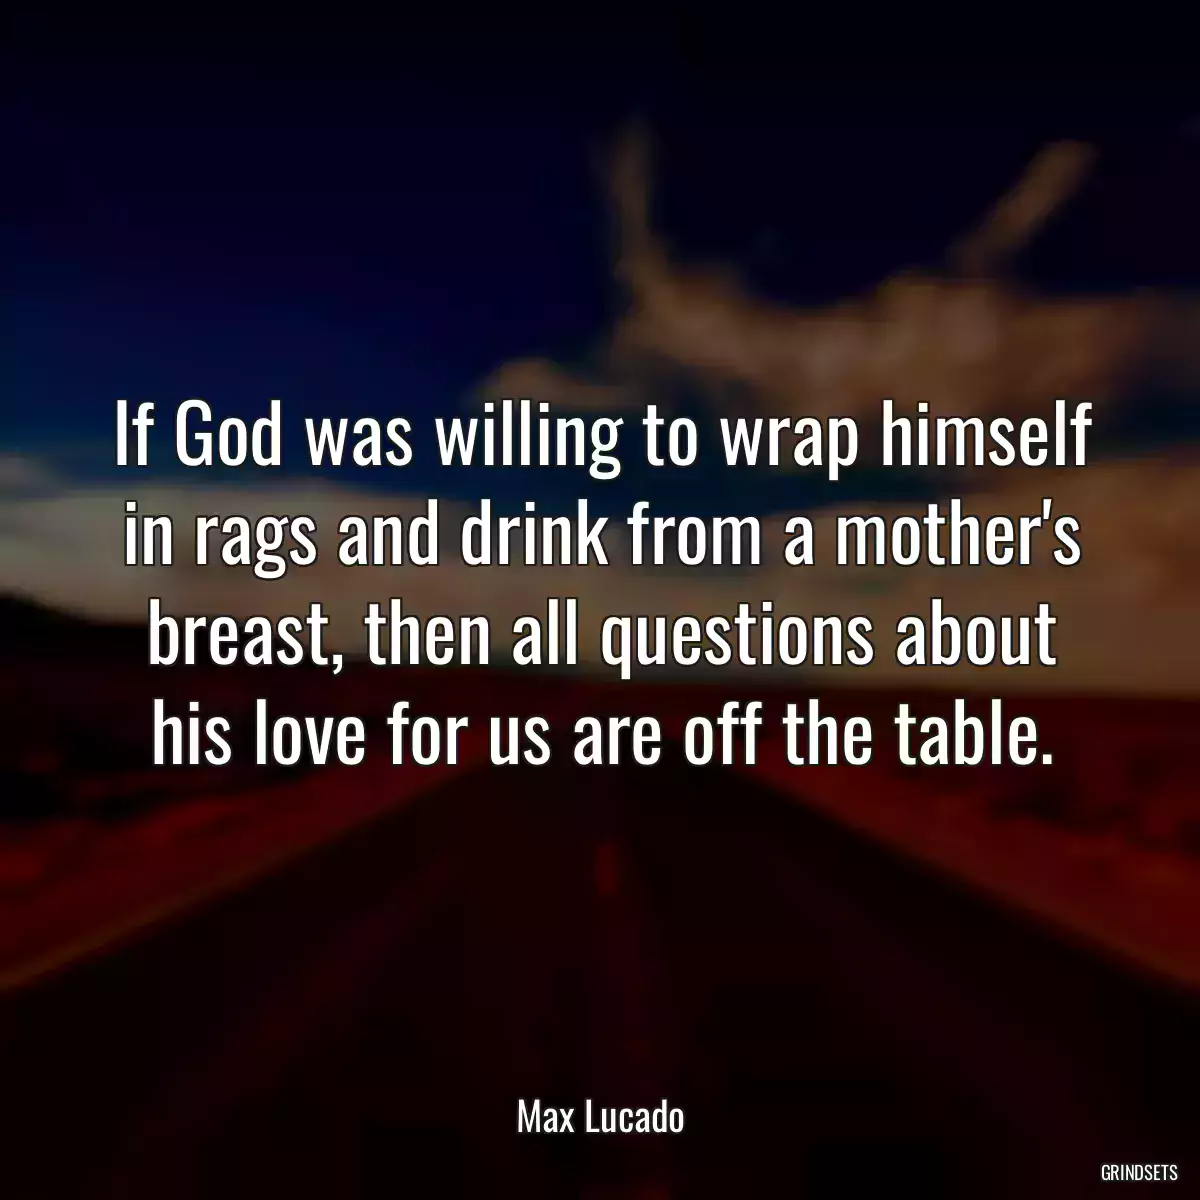 If God was willing to wrap himself in rags and drink from a mother\'s breast, then all questions about his love for us are off the table.